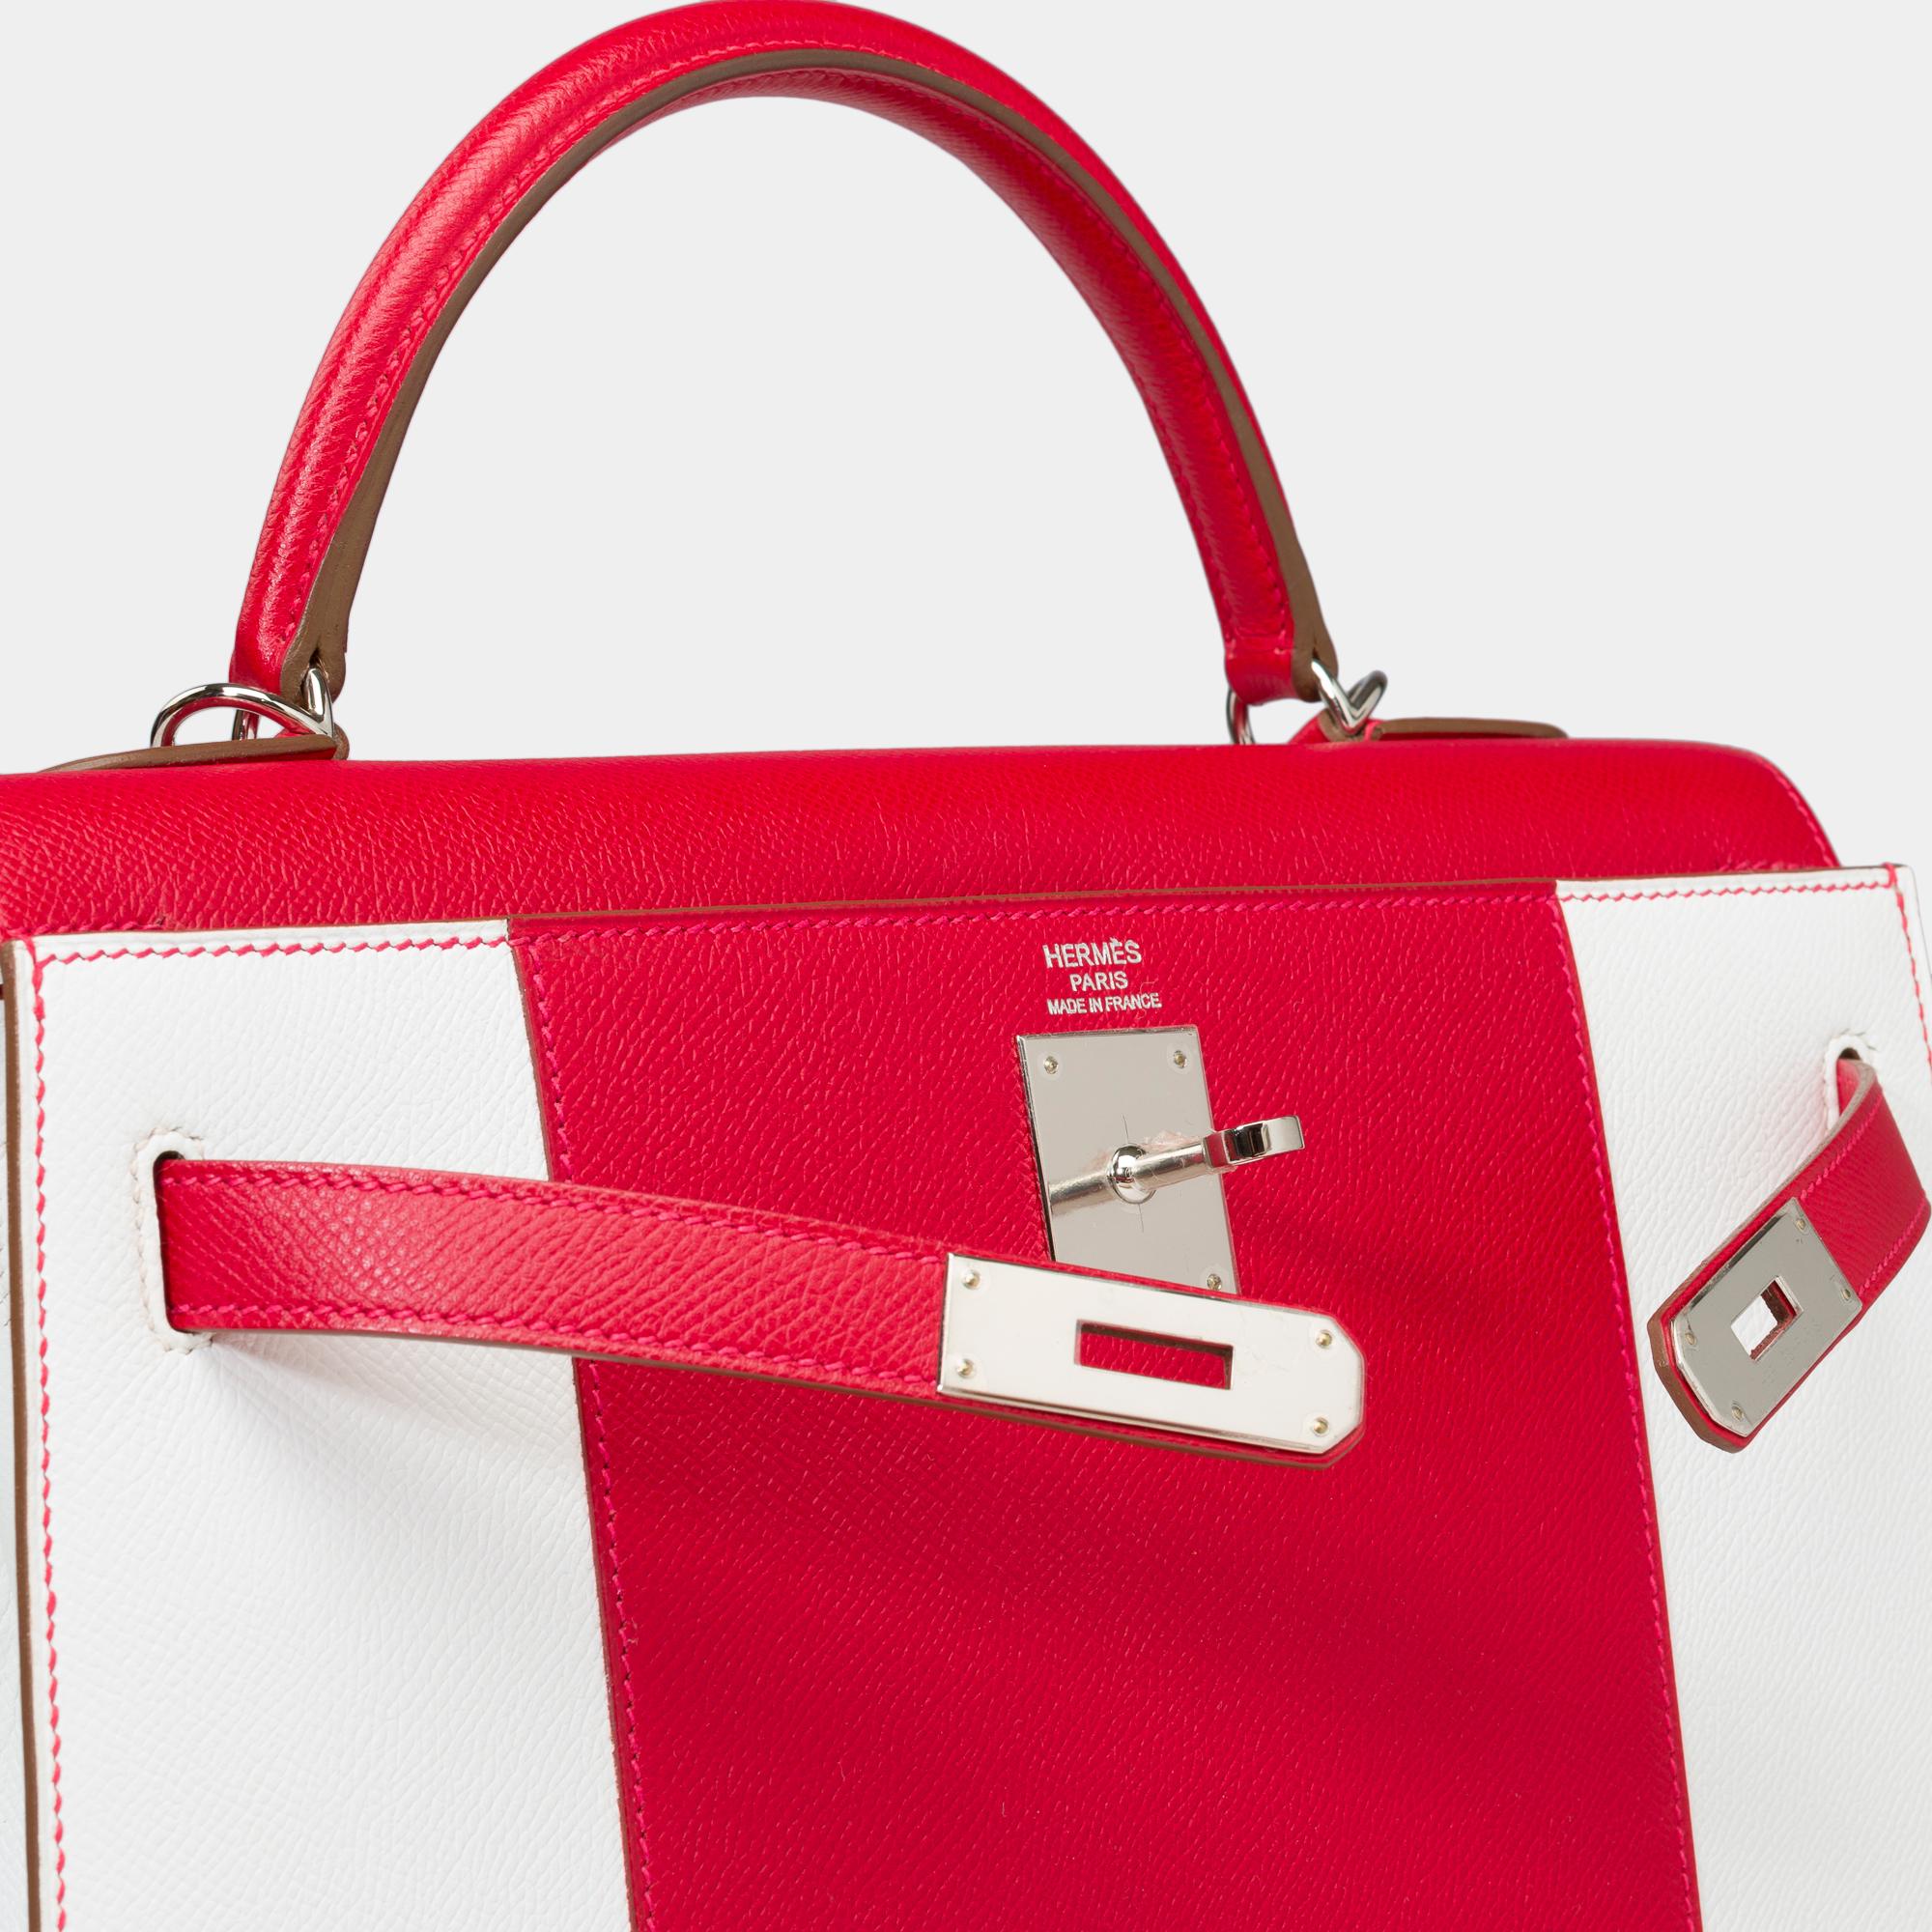 Flag limited edition Hermès Kelly 32  handbag strap in red and white epsom, PHW 2